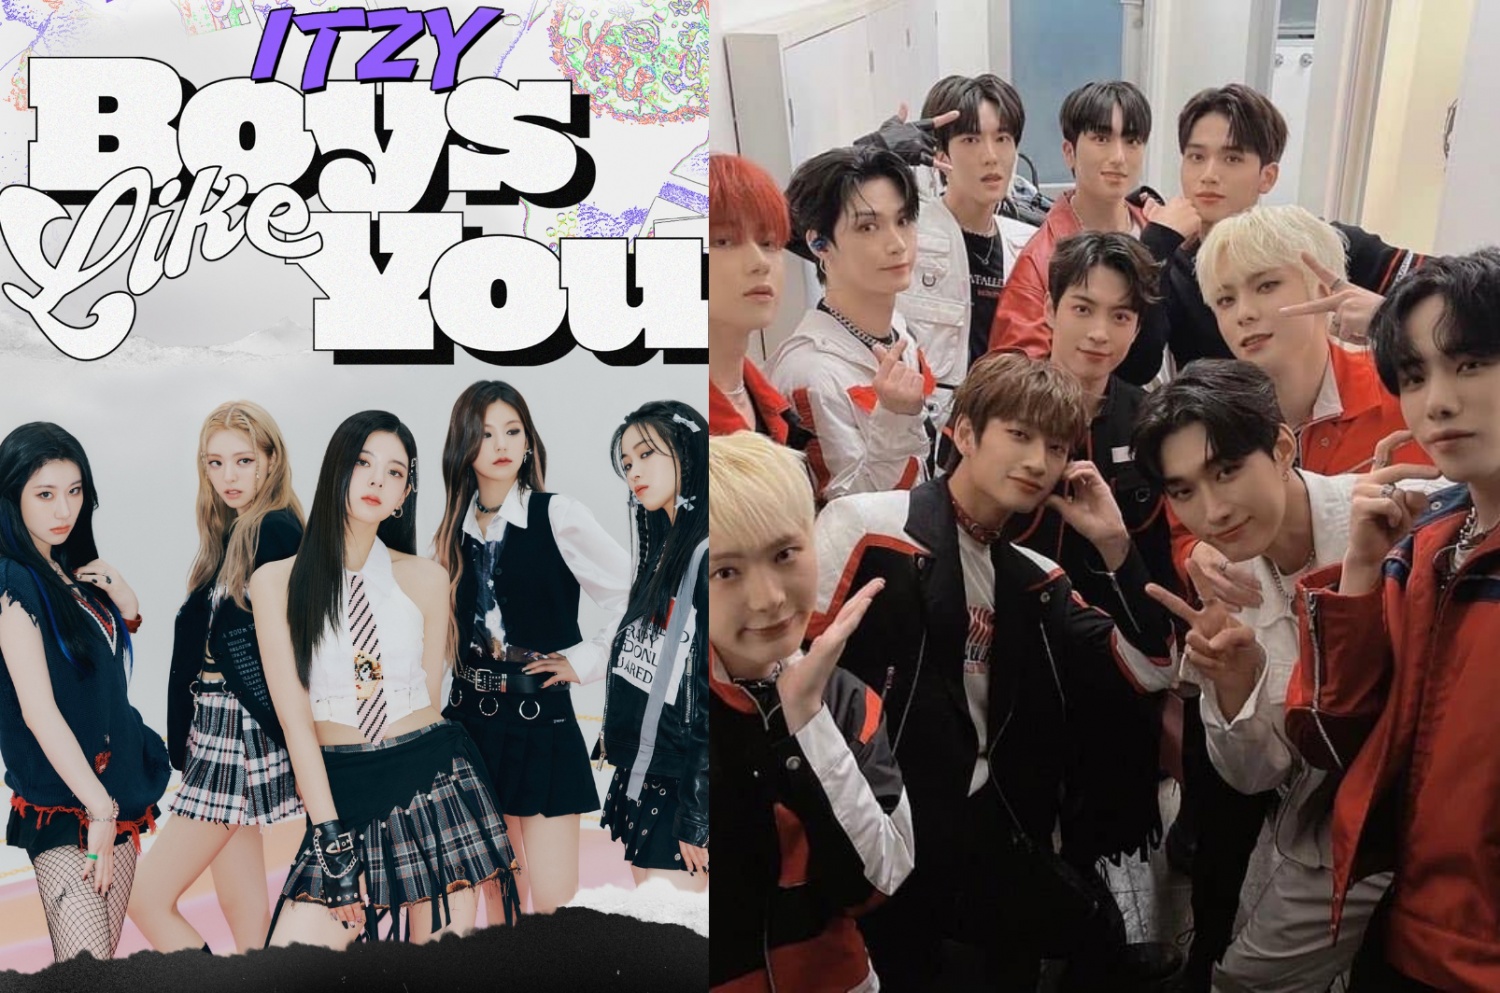 IN THE LOOP: ITZY’s ‘Boys Like You’, OMEGA X allegedly abused, more of this week’s hottest music / news